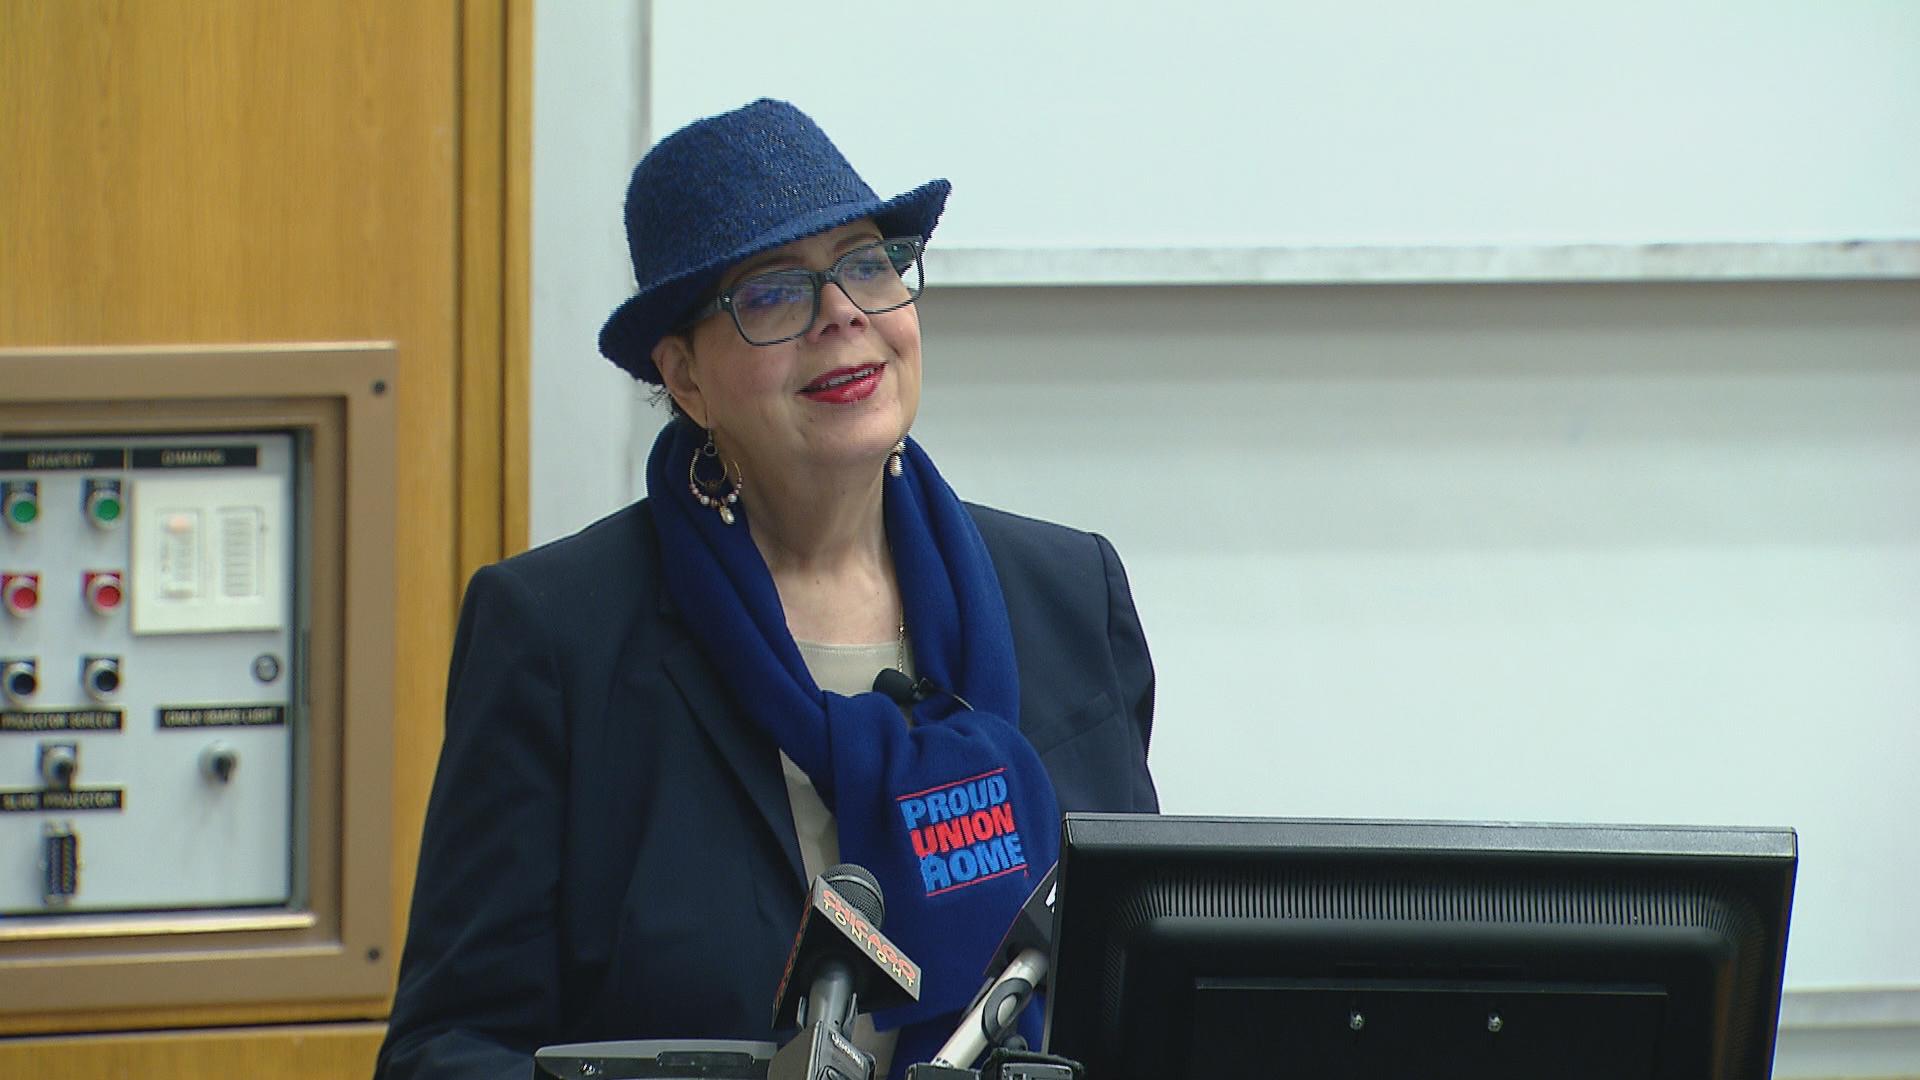 Chicago Teachers Union President Karen Lewis spent an hour Wednesday afternoon lecturing students and taking questions on education policy at the University of Illinois-Chicago. (Chicago Tonight)